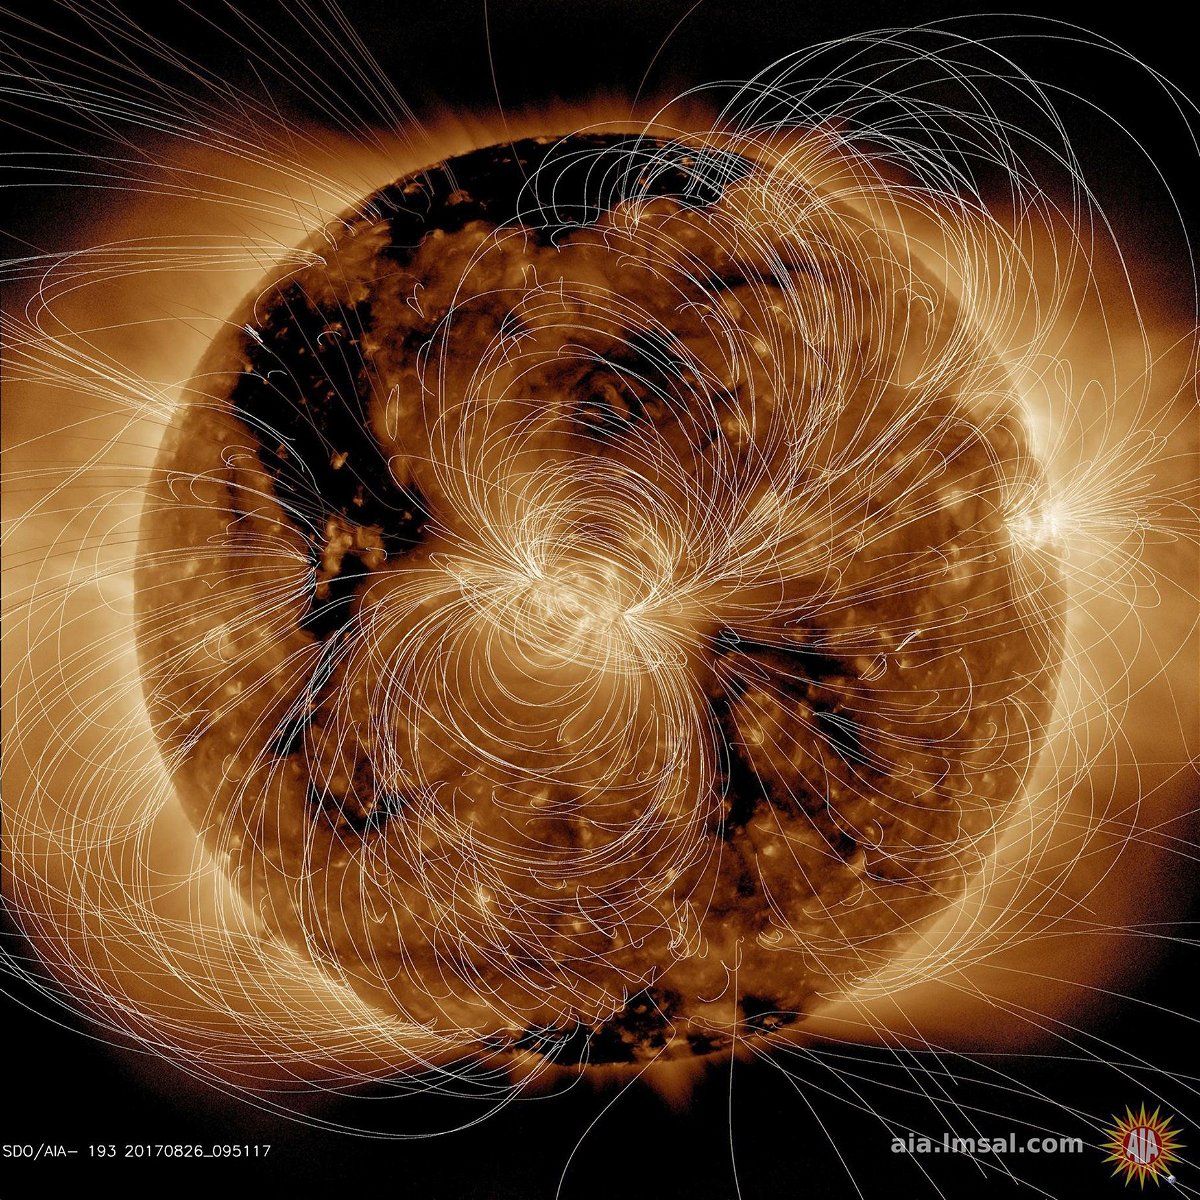 This view of the sun's magnetic field was generated by NASA's Solar Dynamics Observatory.